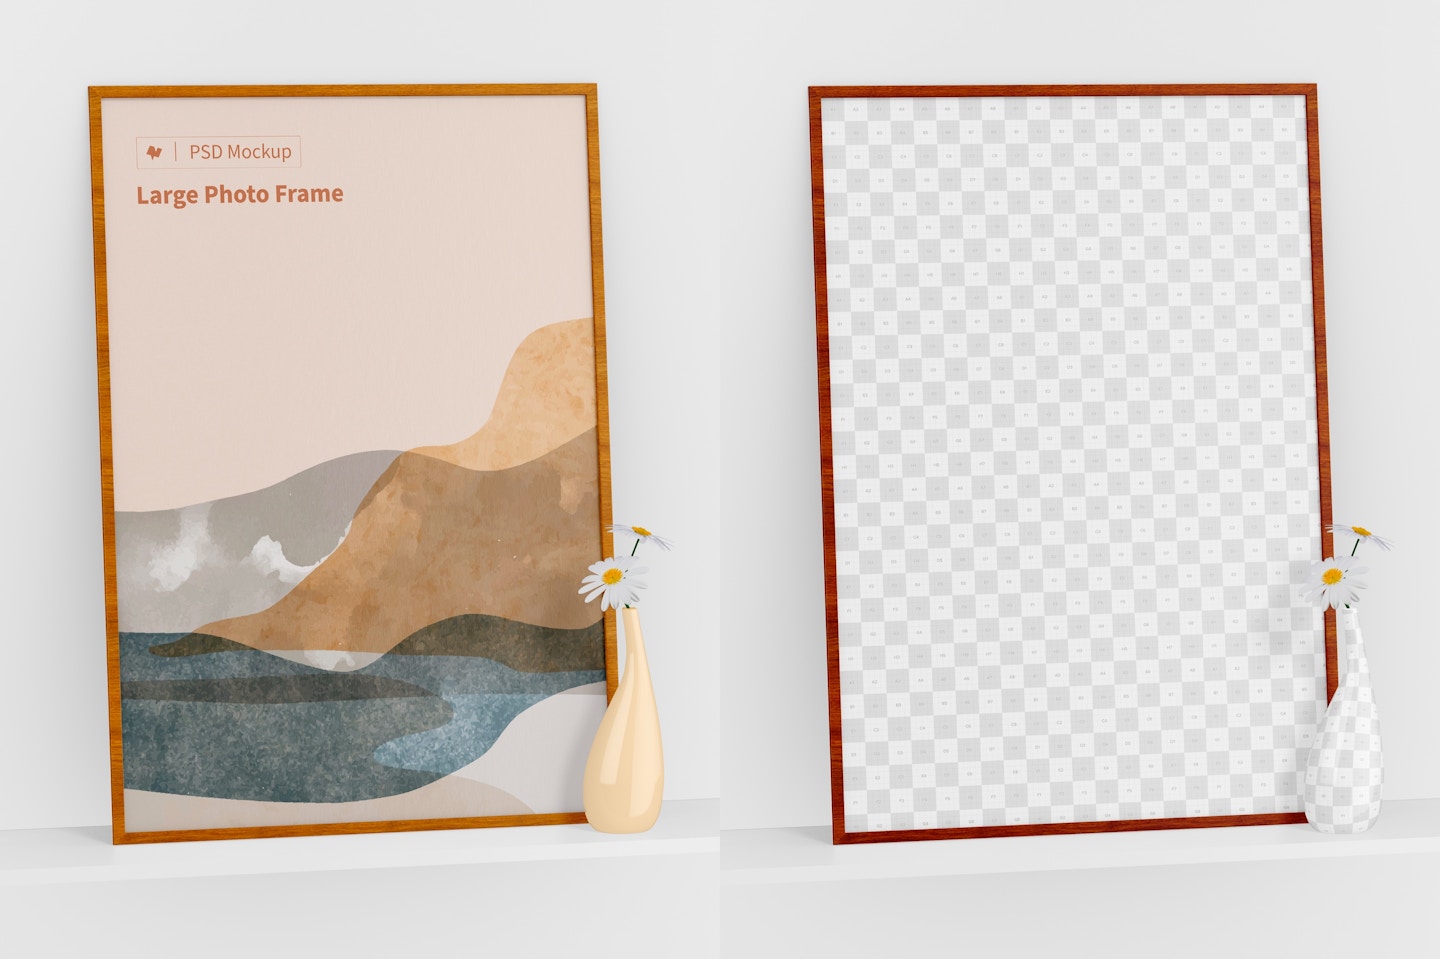 Large Photo Frame Mockup, Perspective View